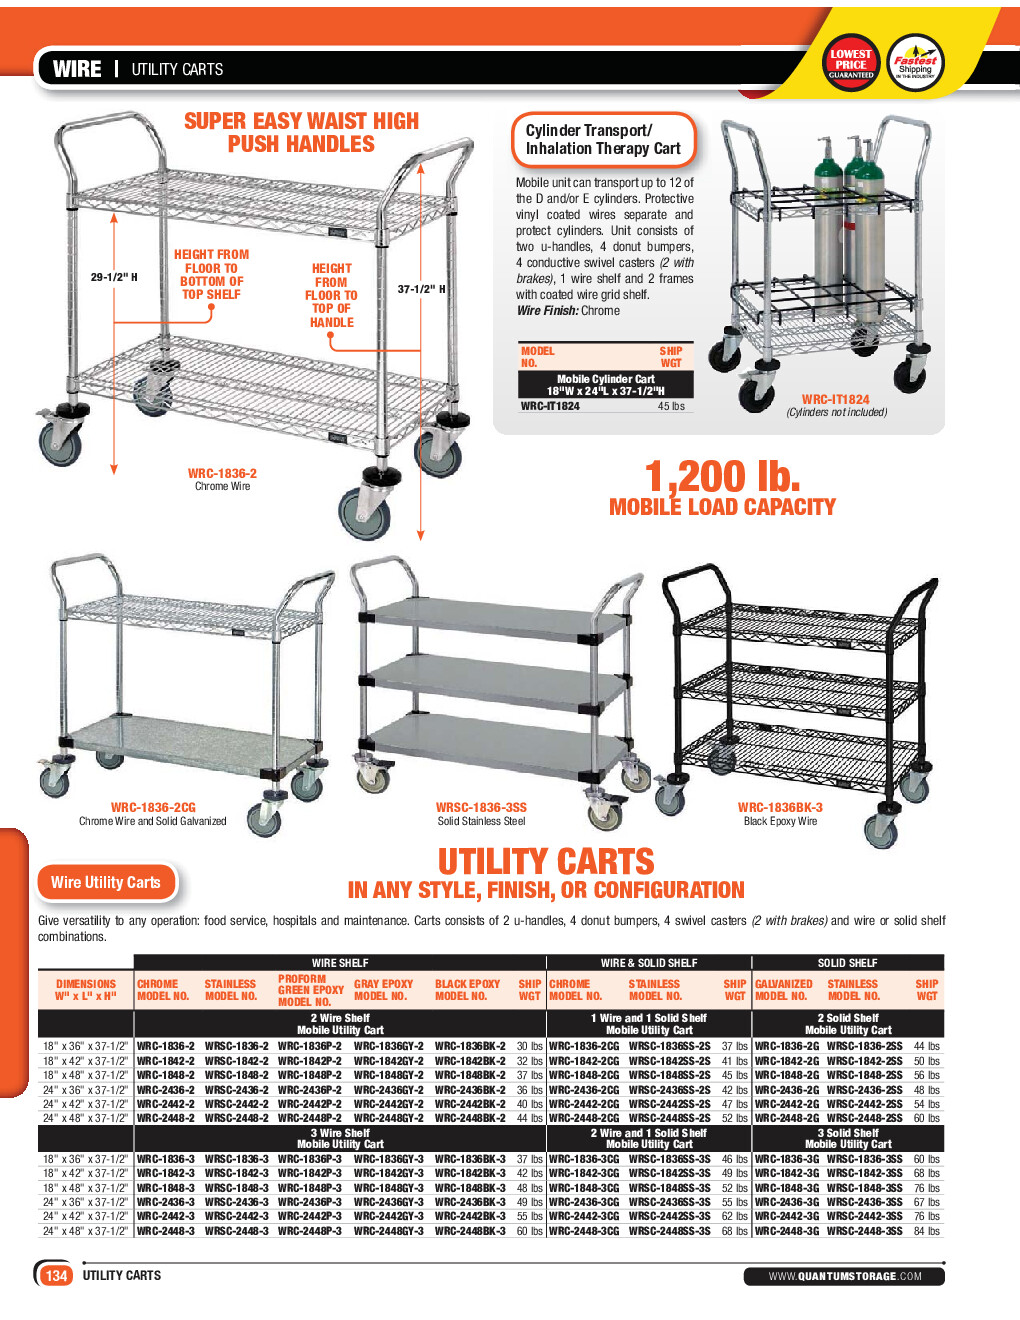 Quantum WRSC-1848-3 Metal Wire Bussing Utility Transport Cart